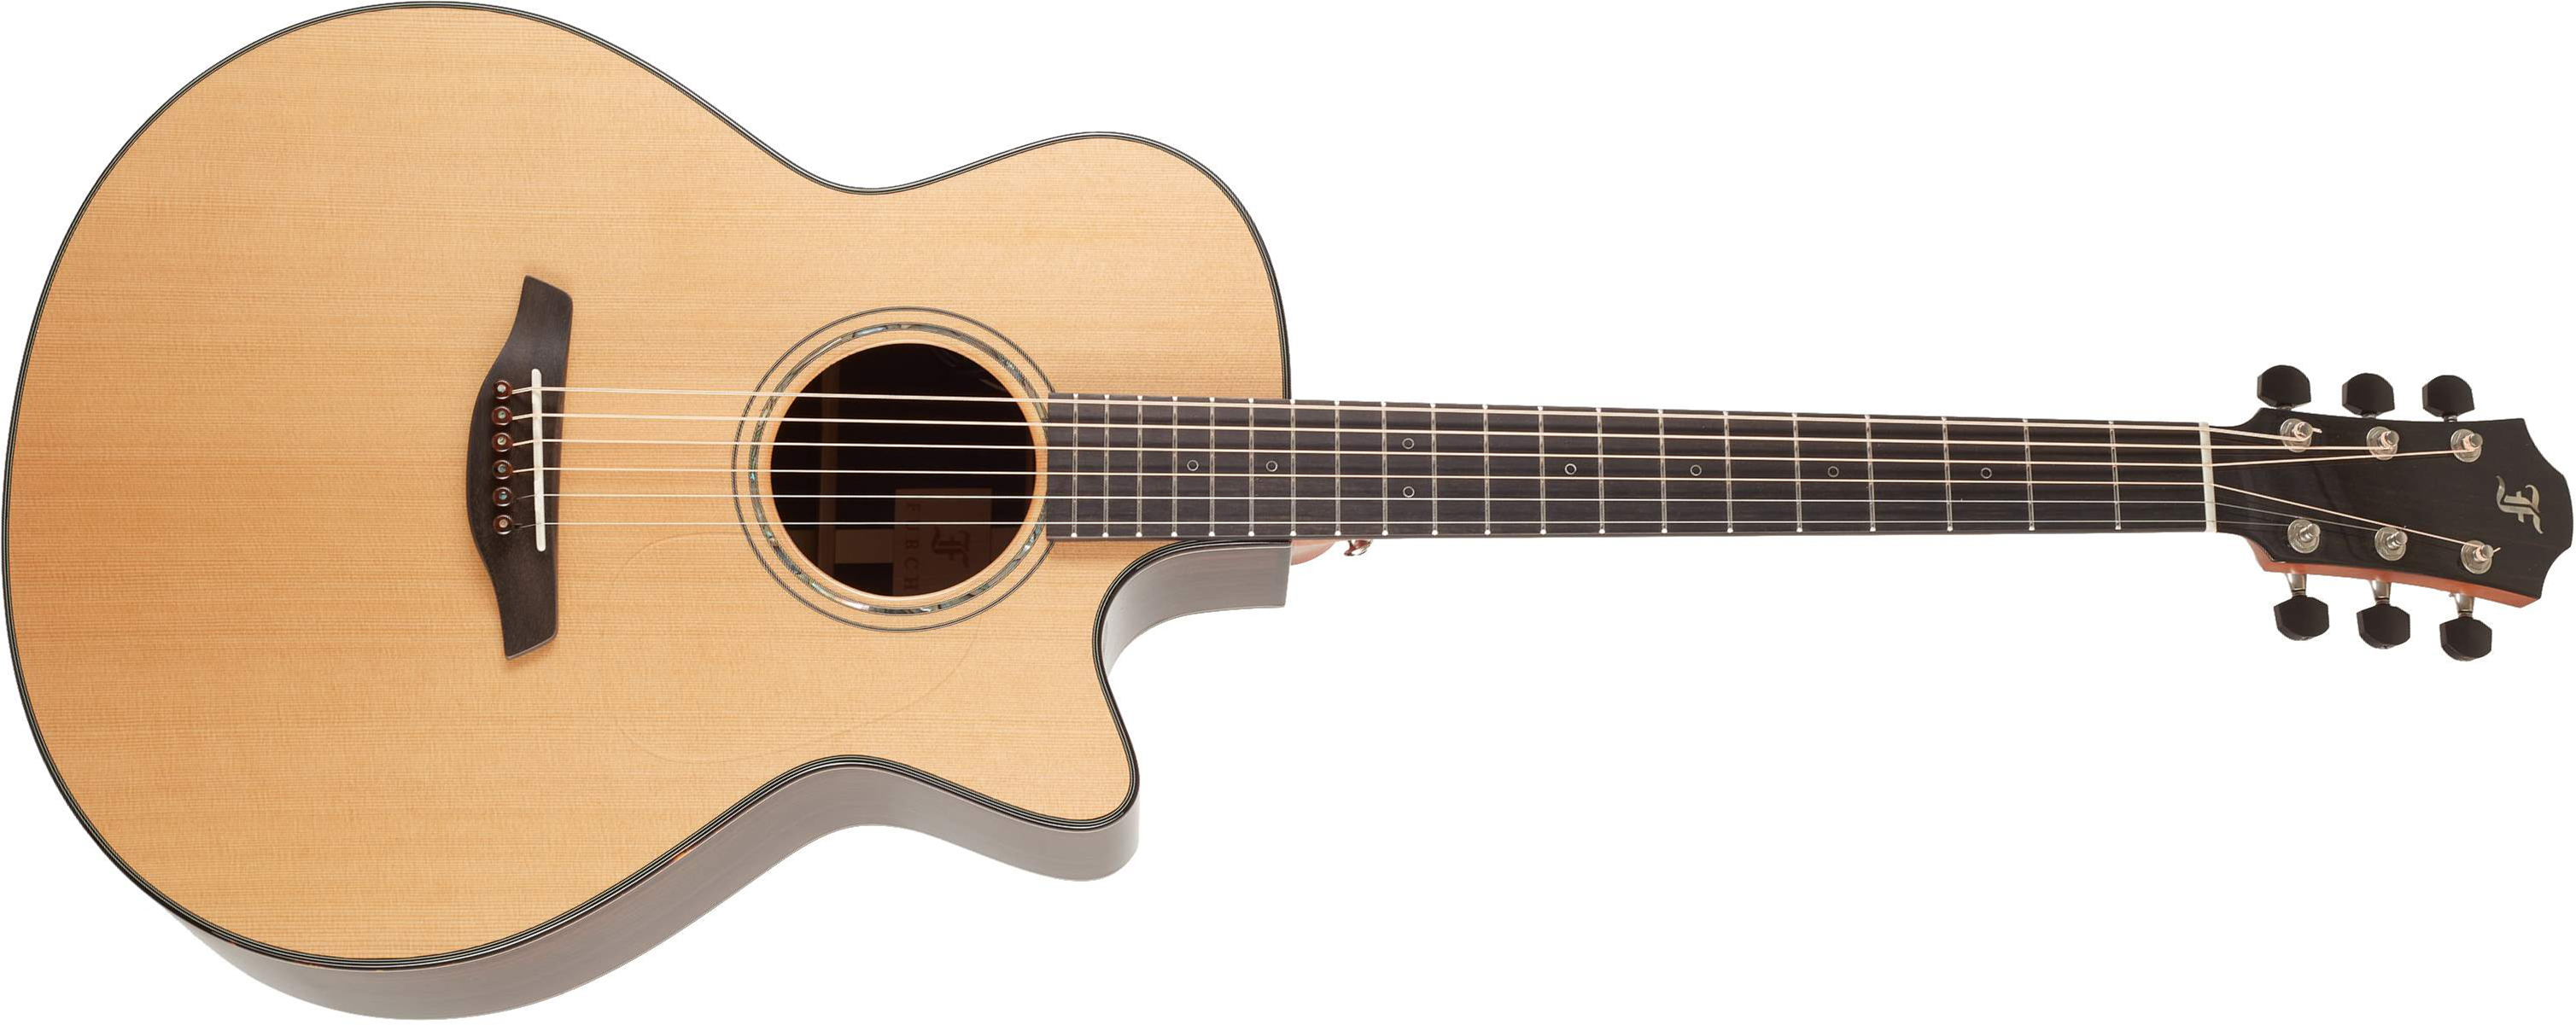 Furch Gc-cr Lrb1 Yellow Grand Auditorium Cedre Palissandre Eb - Natural Full-pore - Electro acoustic guitar - Main picture